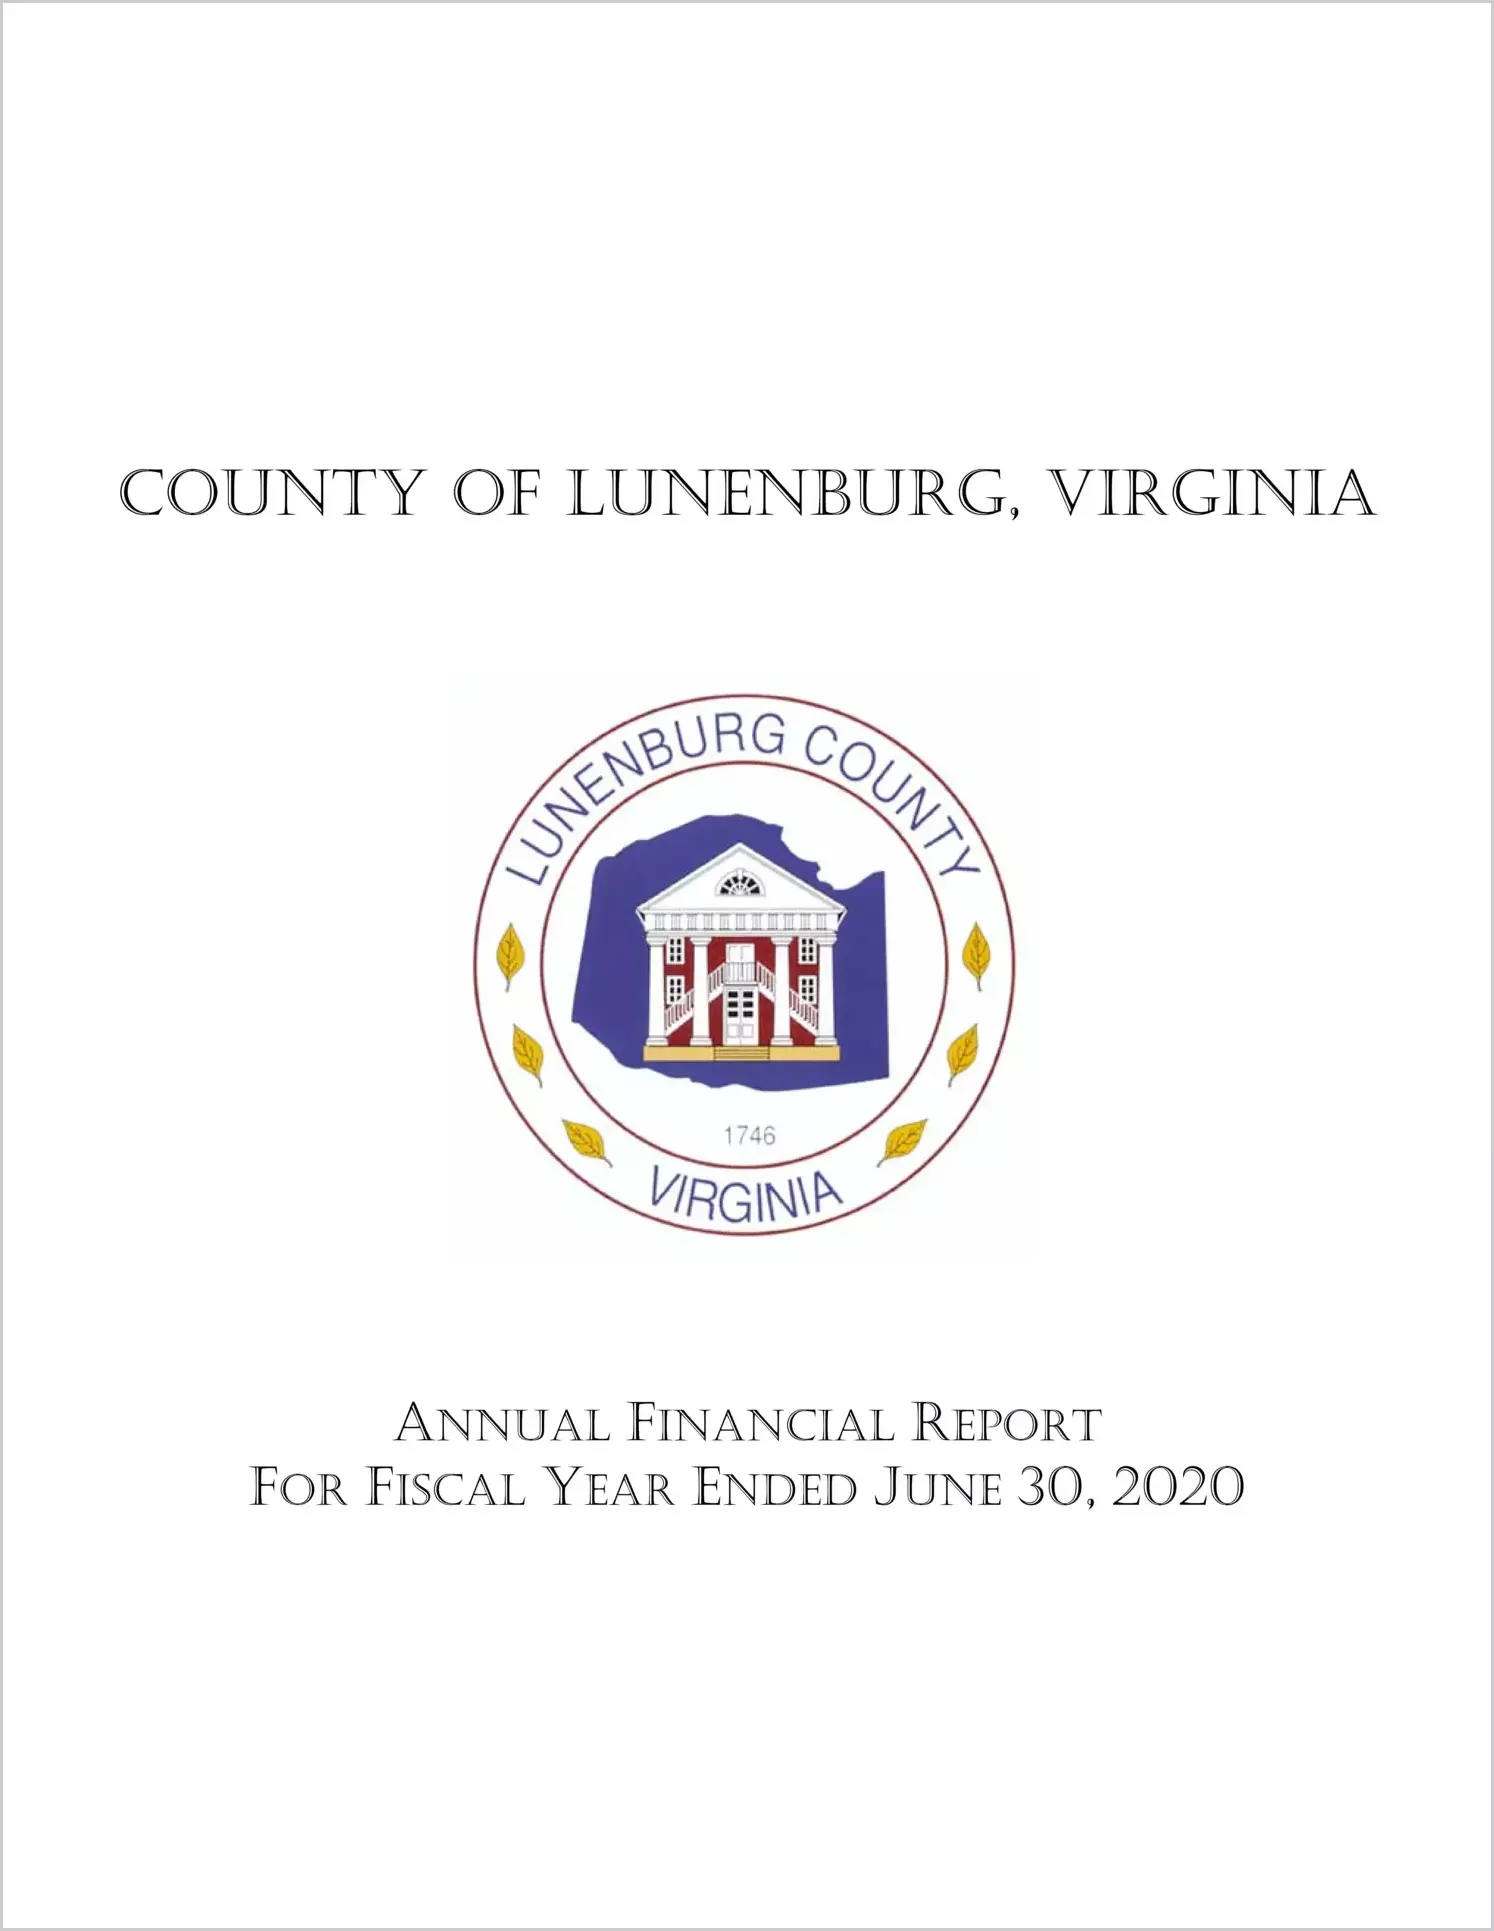 2020 Annual Financial Report for County of Lunenburg